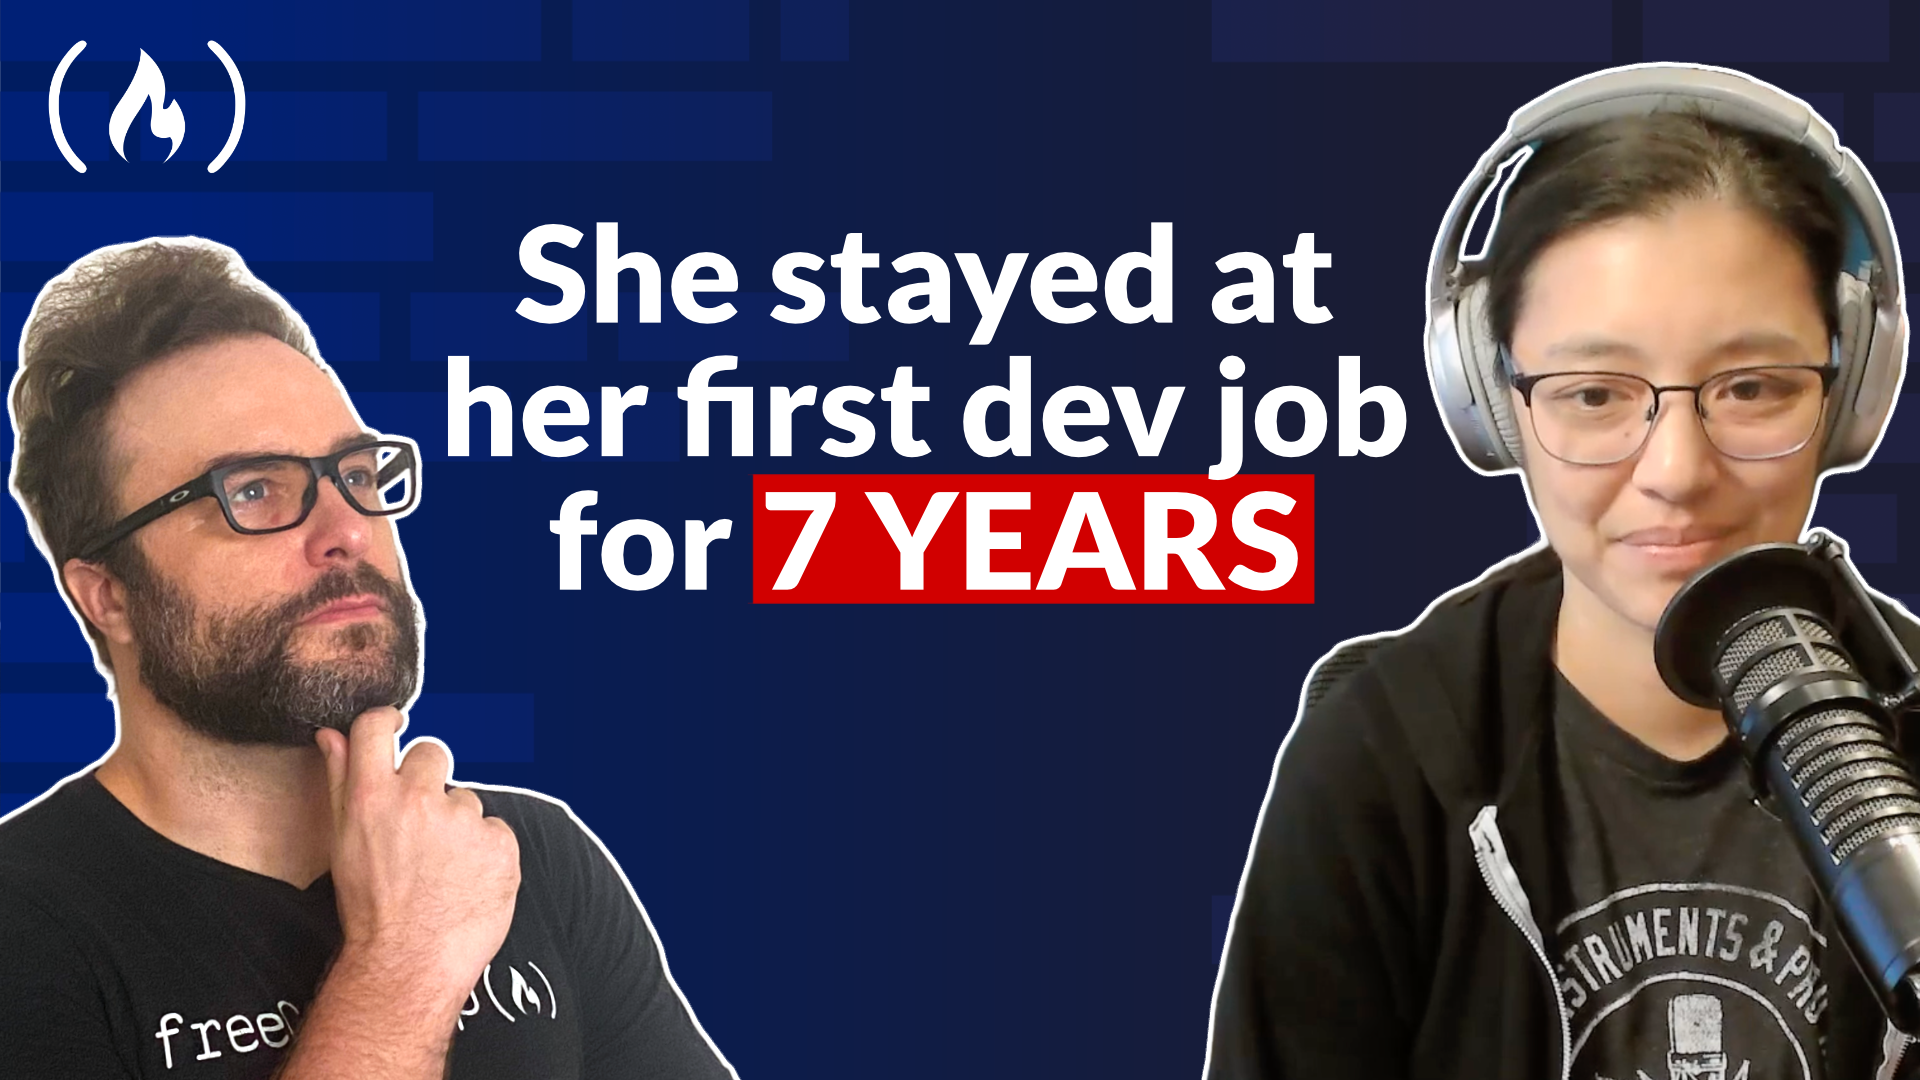 From doing data entry to becoming a developer with Jessica Chan AKA Coder Coder [Podcast #132]